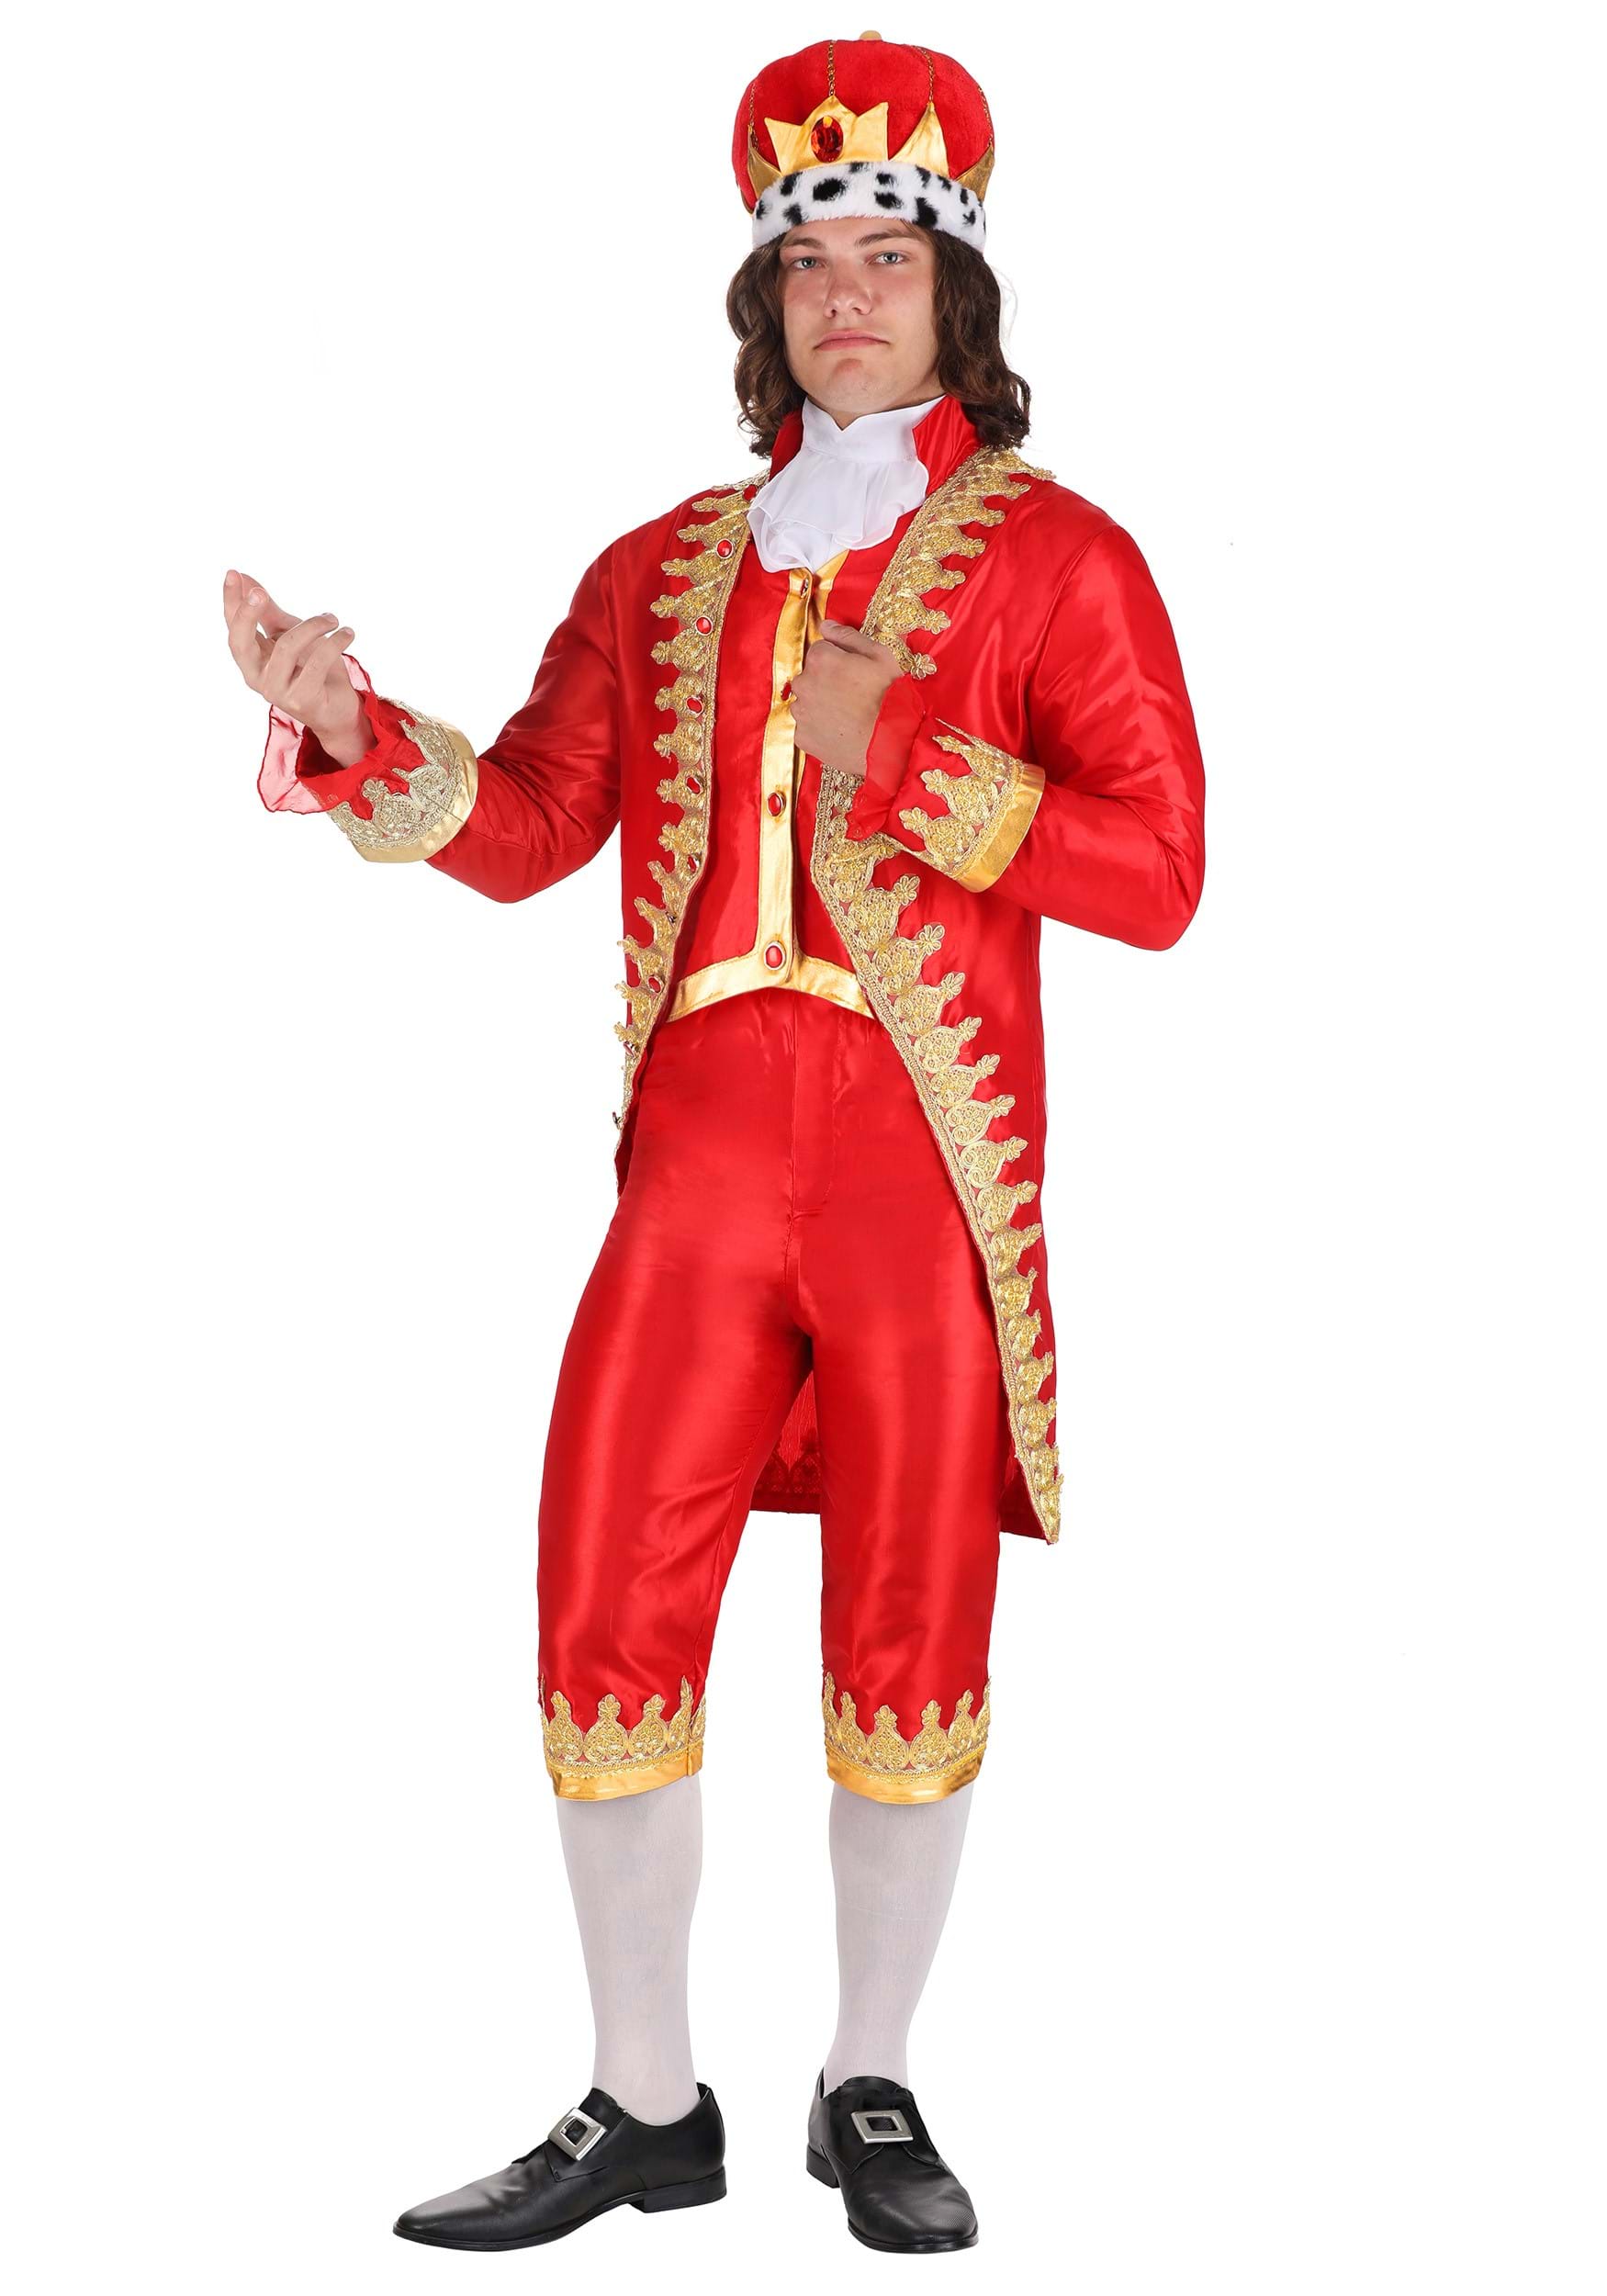 Image of Adult King George Costume | Men's Historical Costumes ID FUN6576AD-XL